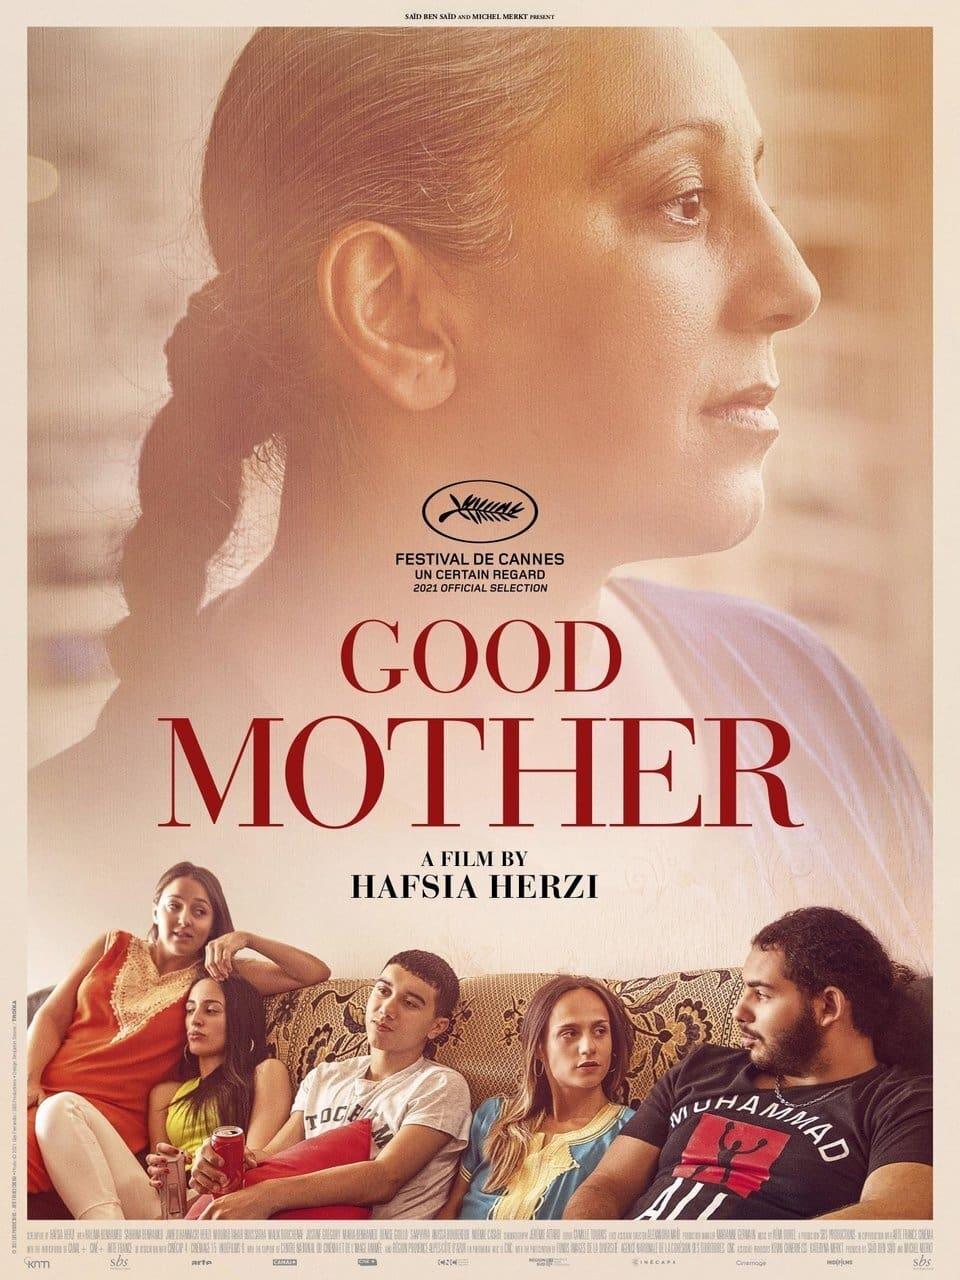 Good Mother poster